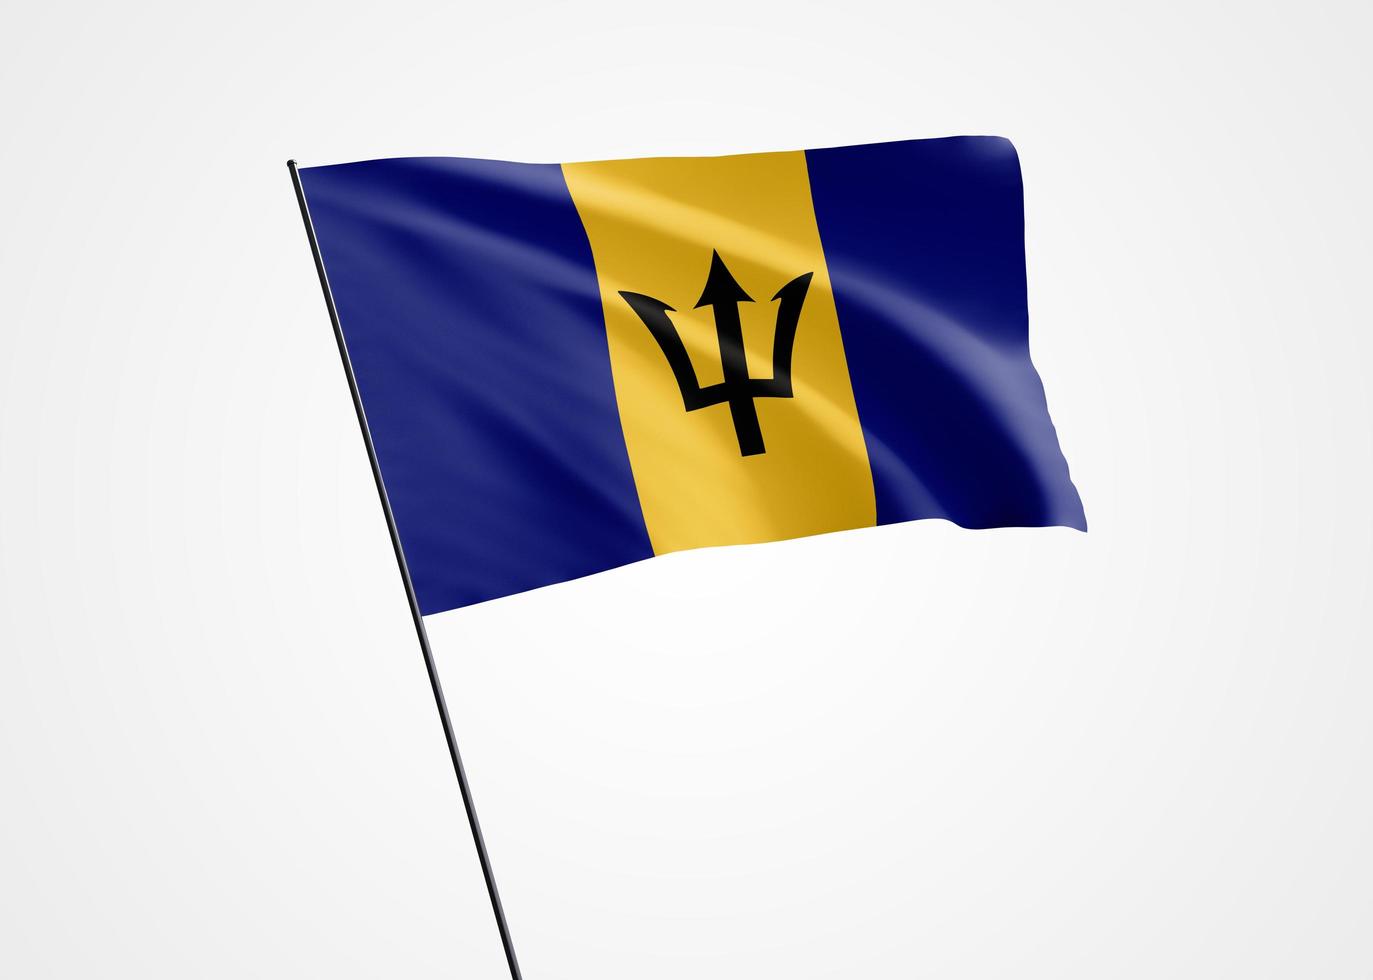 Barbados flag flying high in the isolated background. November 30 Barbados independence day. World national flag collection world national flag collection photo